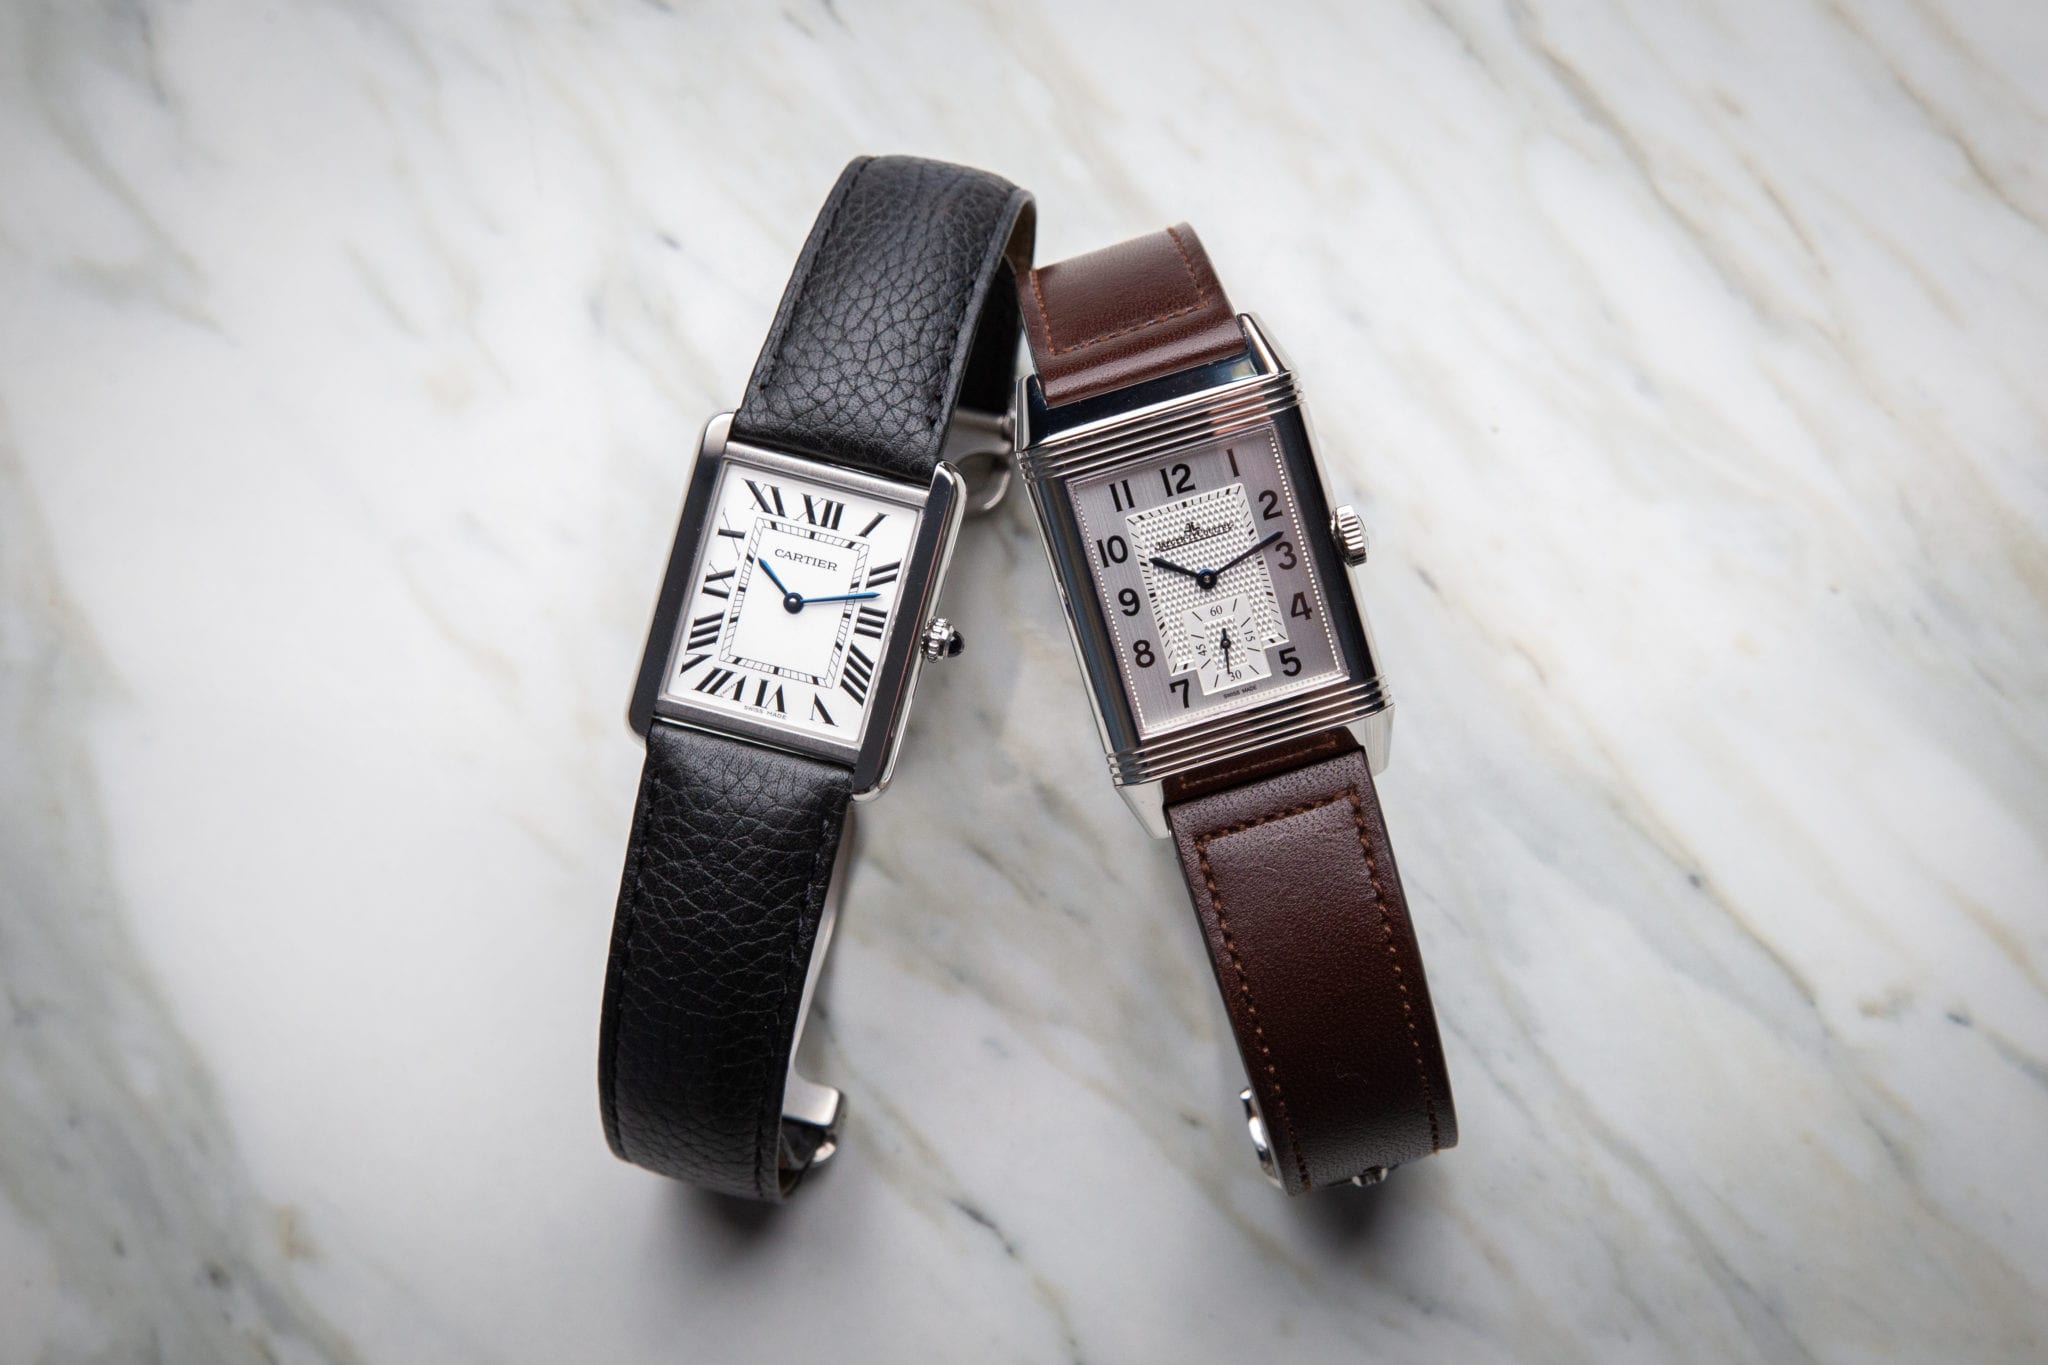 The JLC Reverso and the Cartier Tank 